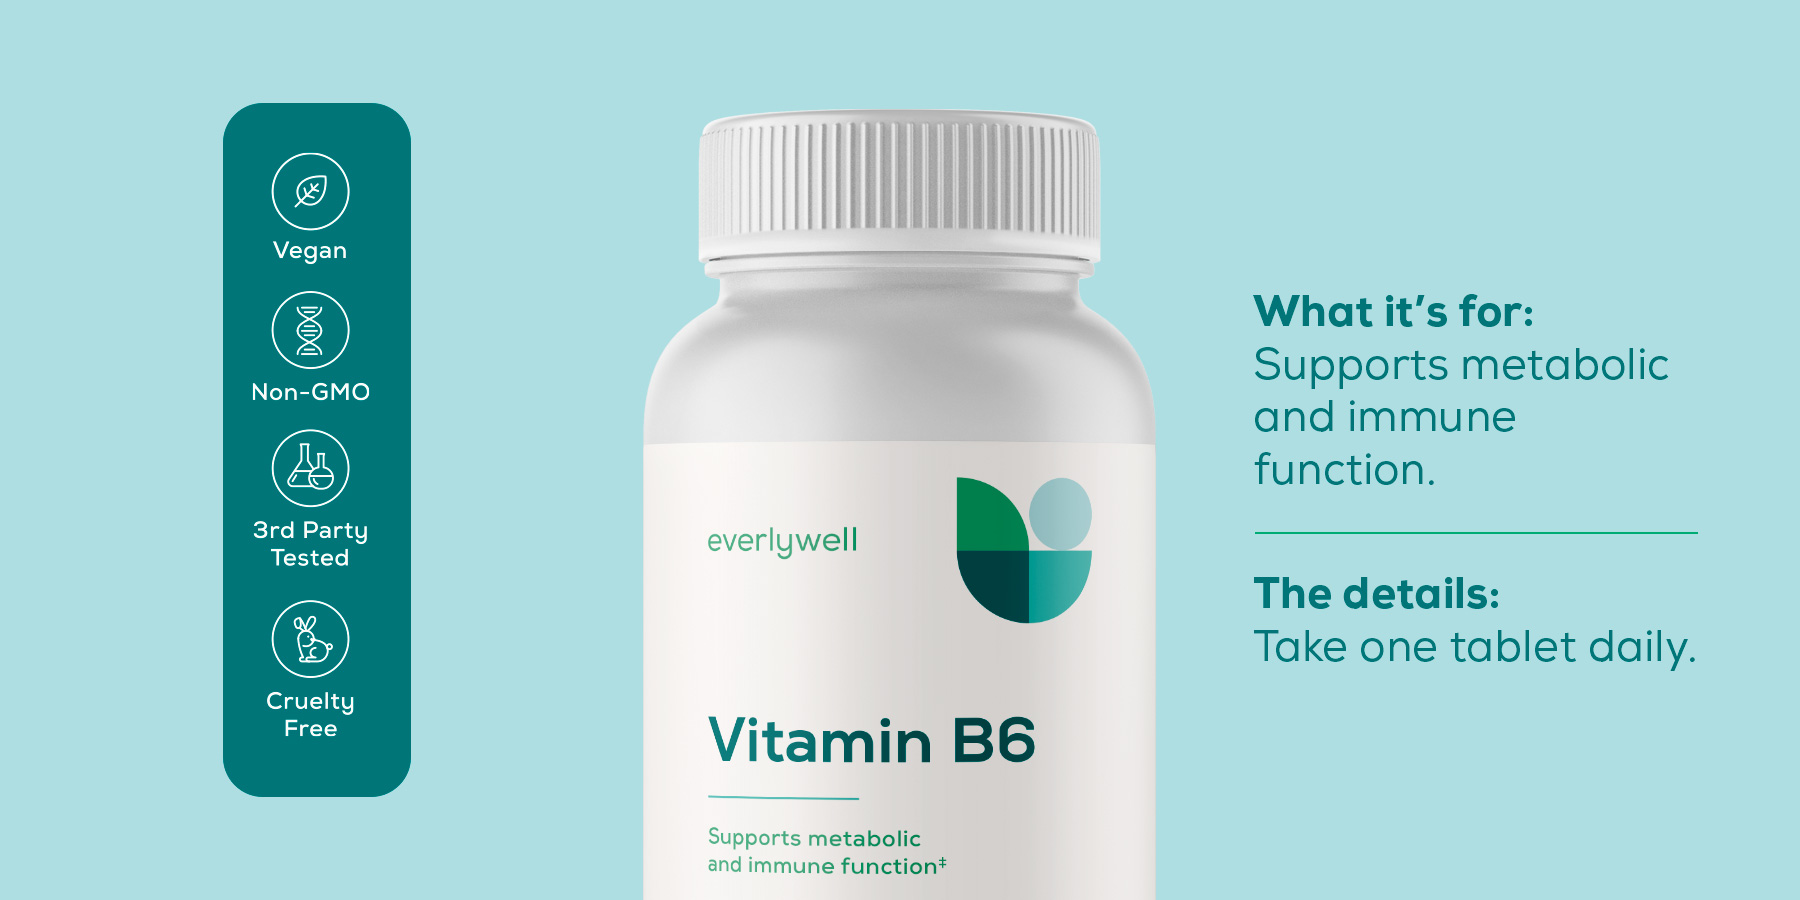 Everlywell vitamin & supplements are here! B6